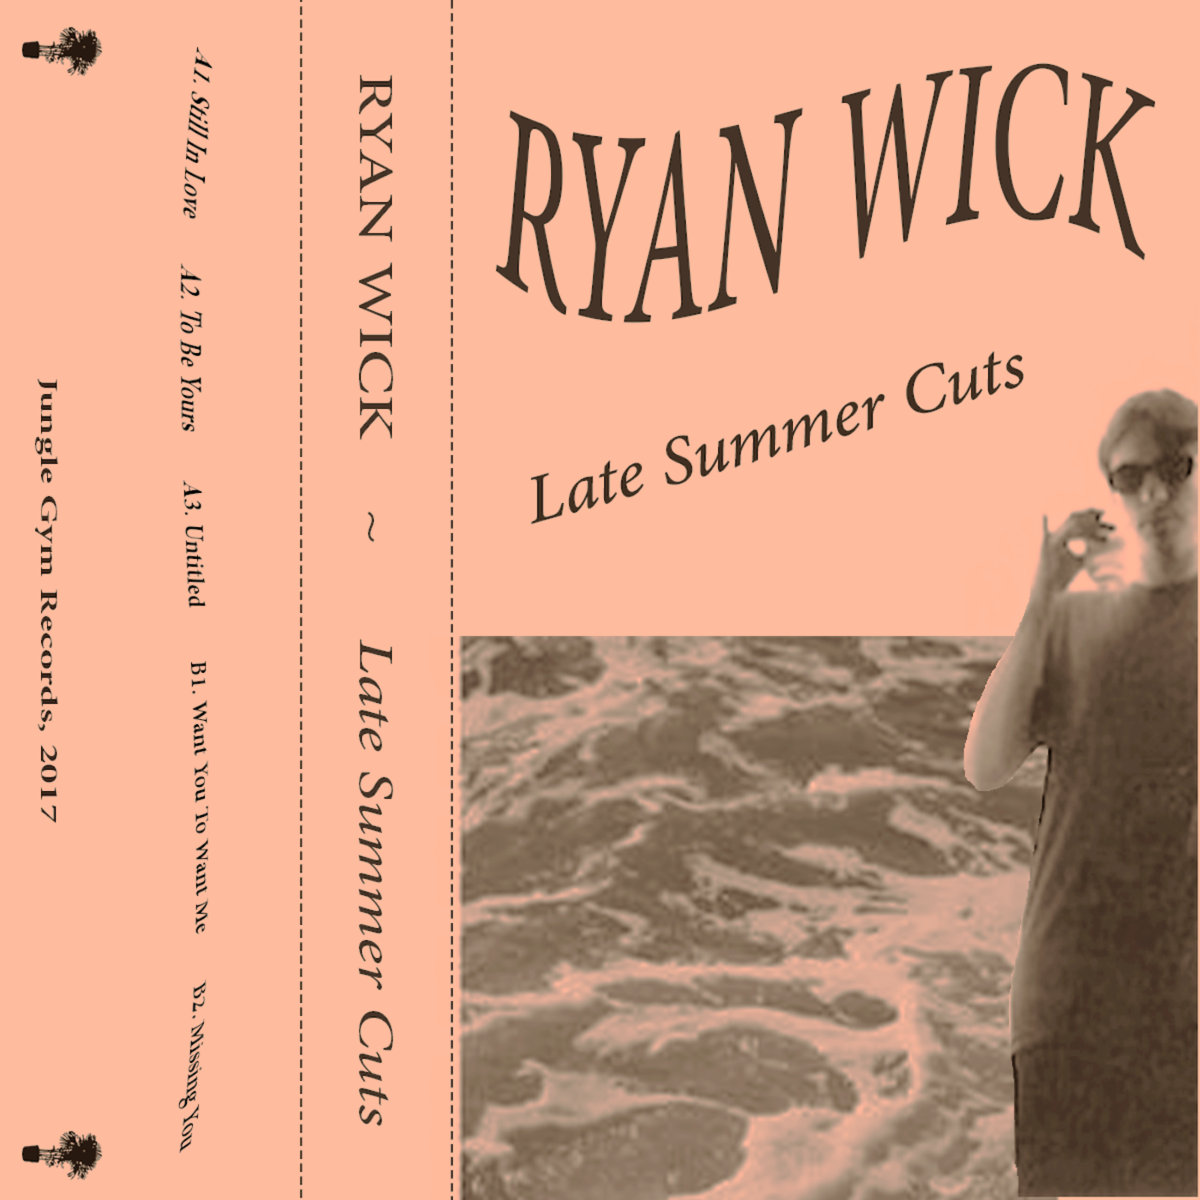 image cover: Ryan Wick - [UDG 0.15] "Late Summer Cuts" / JUNGLE GYM RECORDS